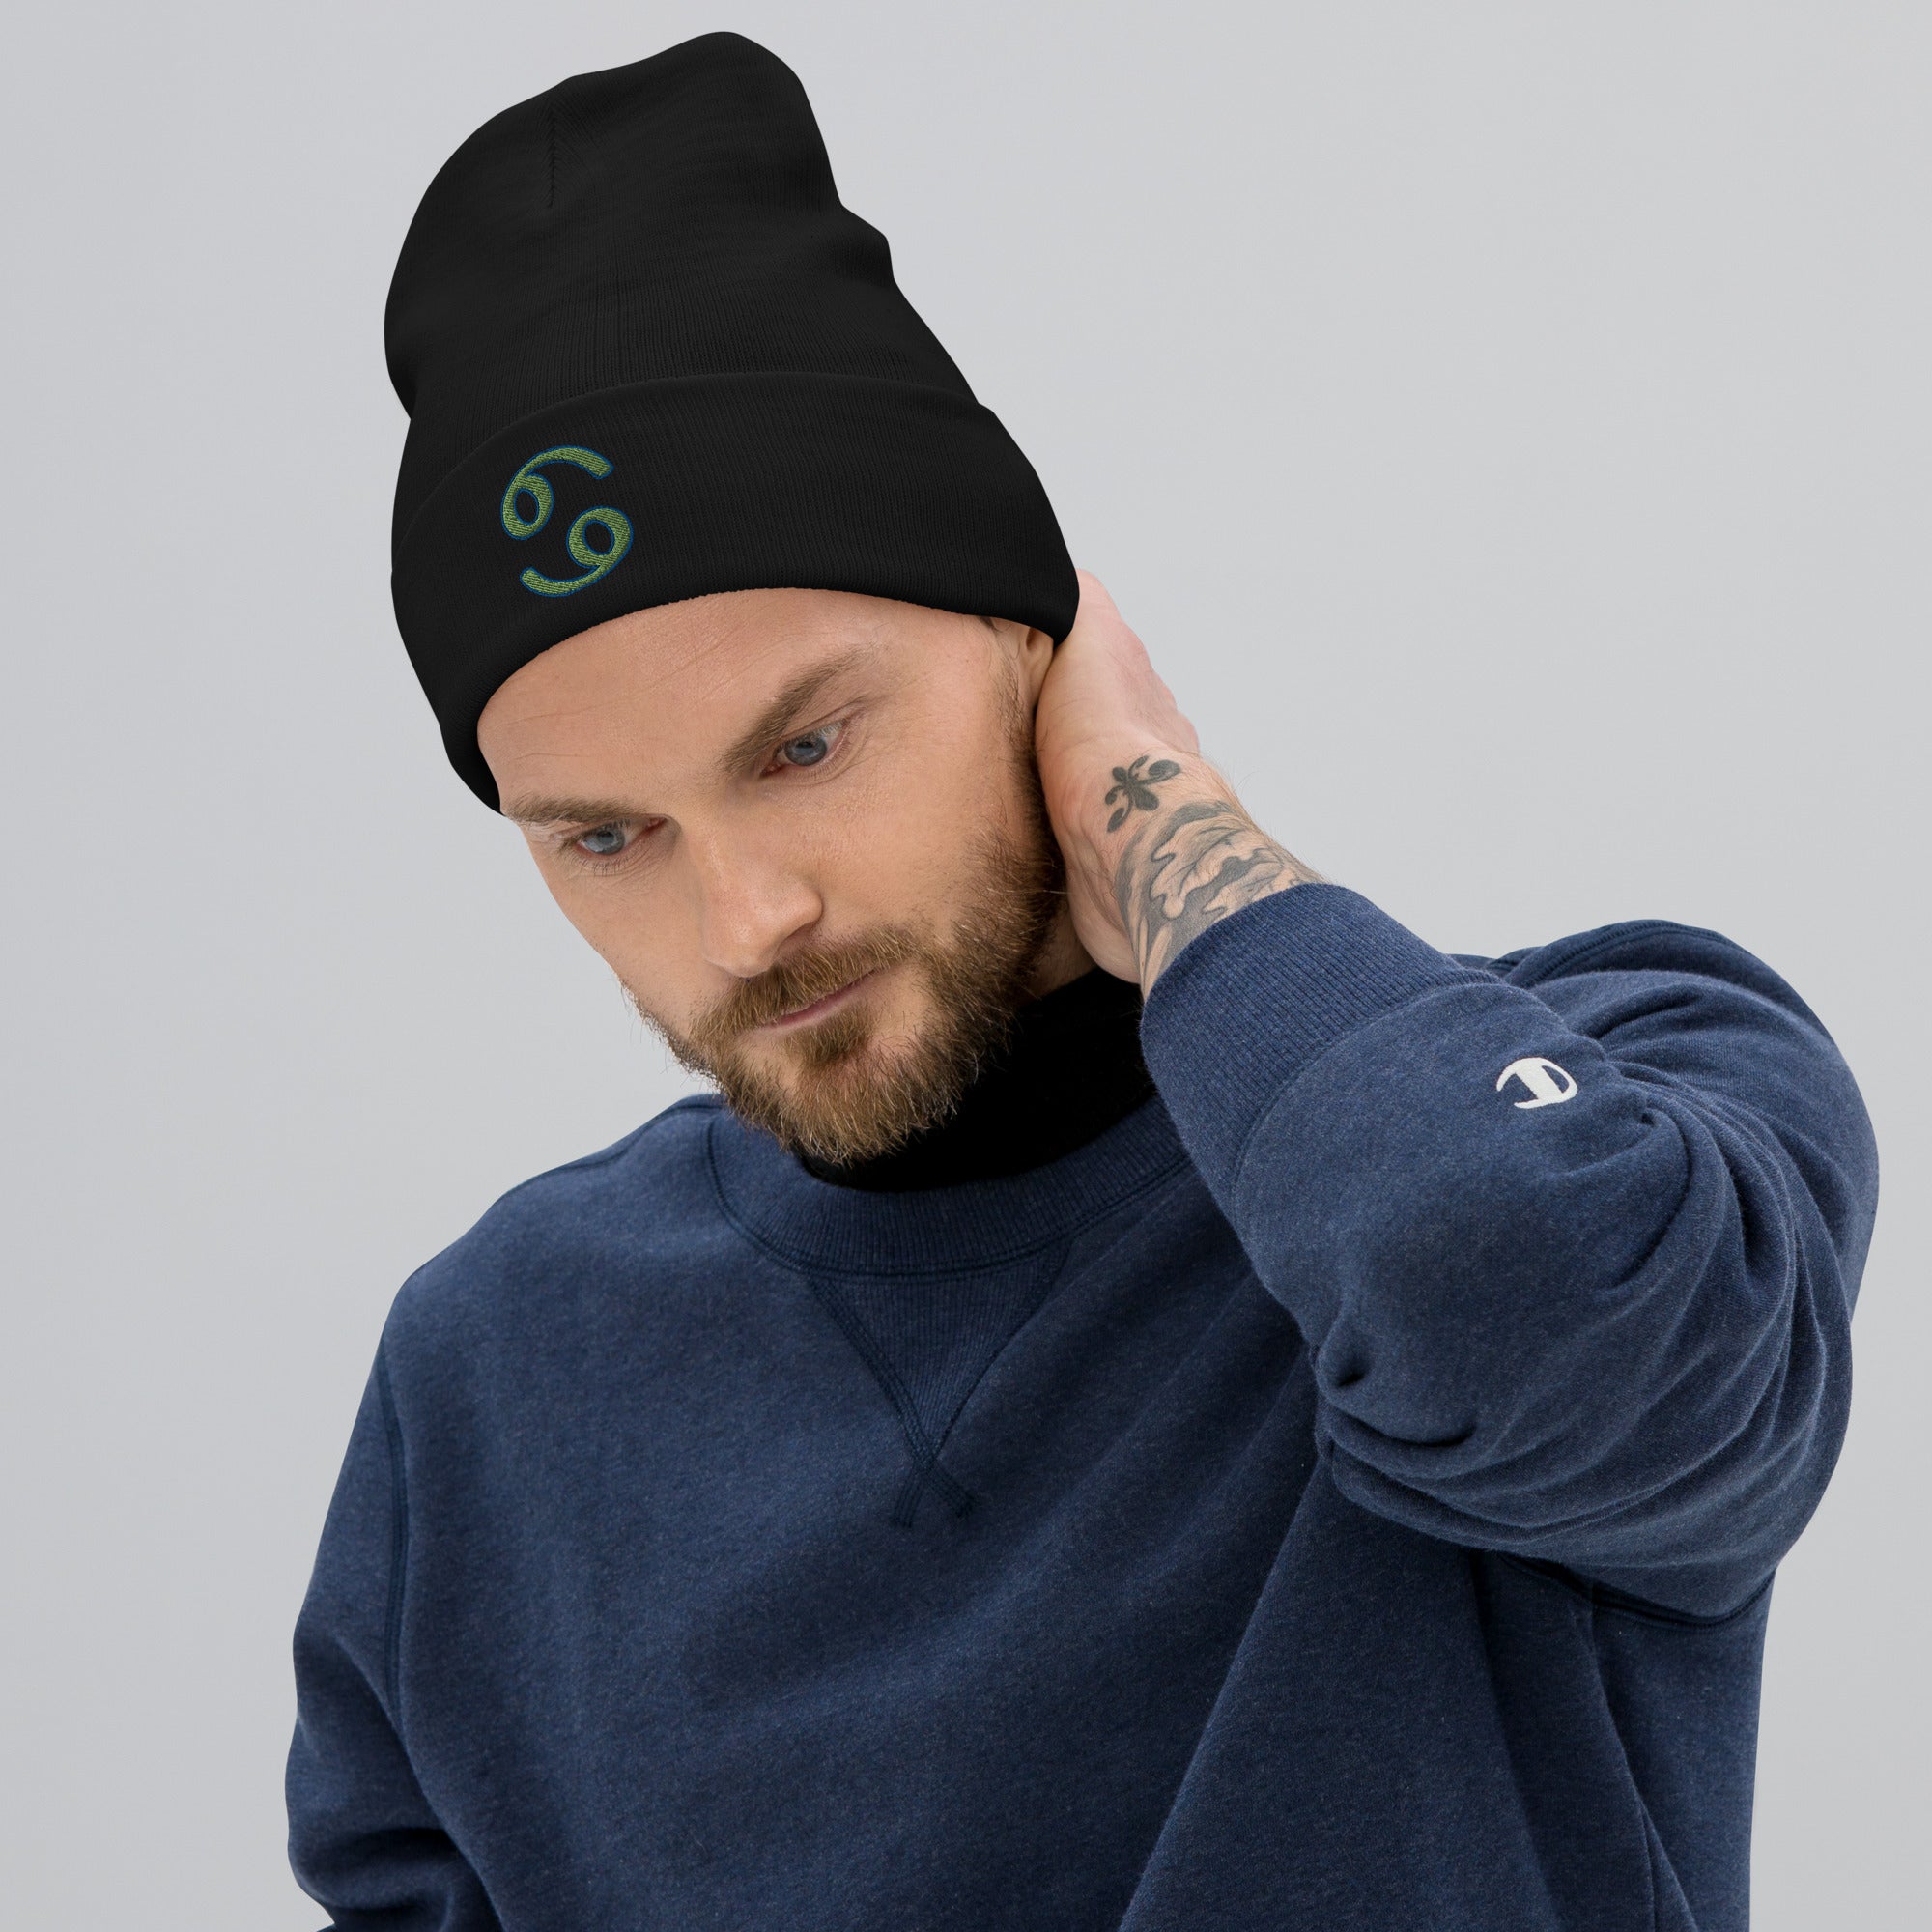 Zodiac Sign Cancer Embroidered Cuff Beanie Astrology Horoscope Blue Green Thread - Edge of Life Designs